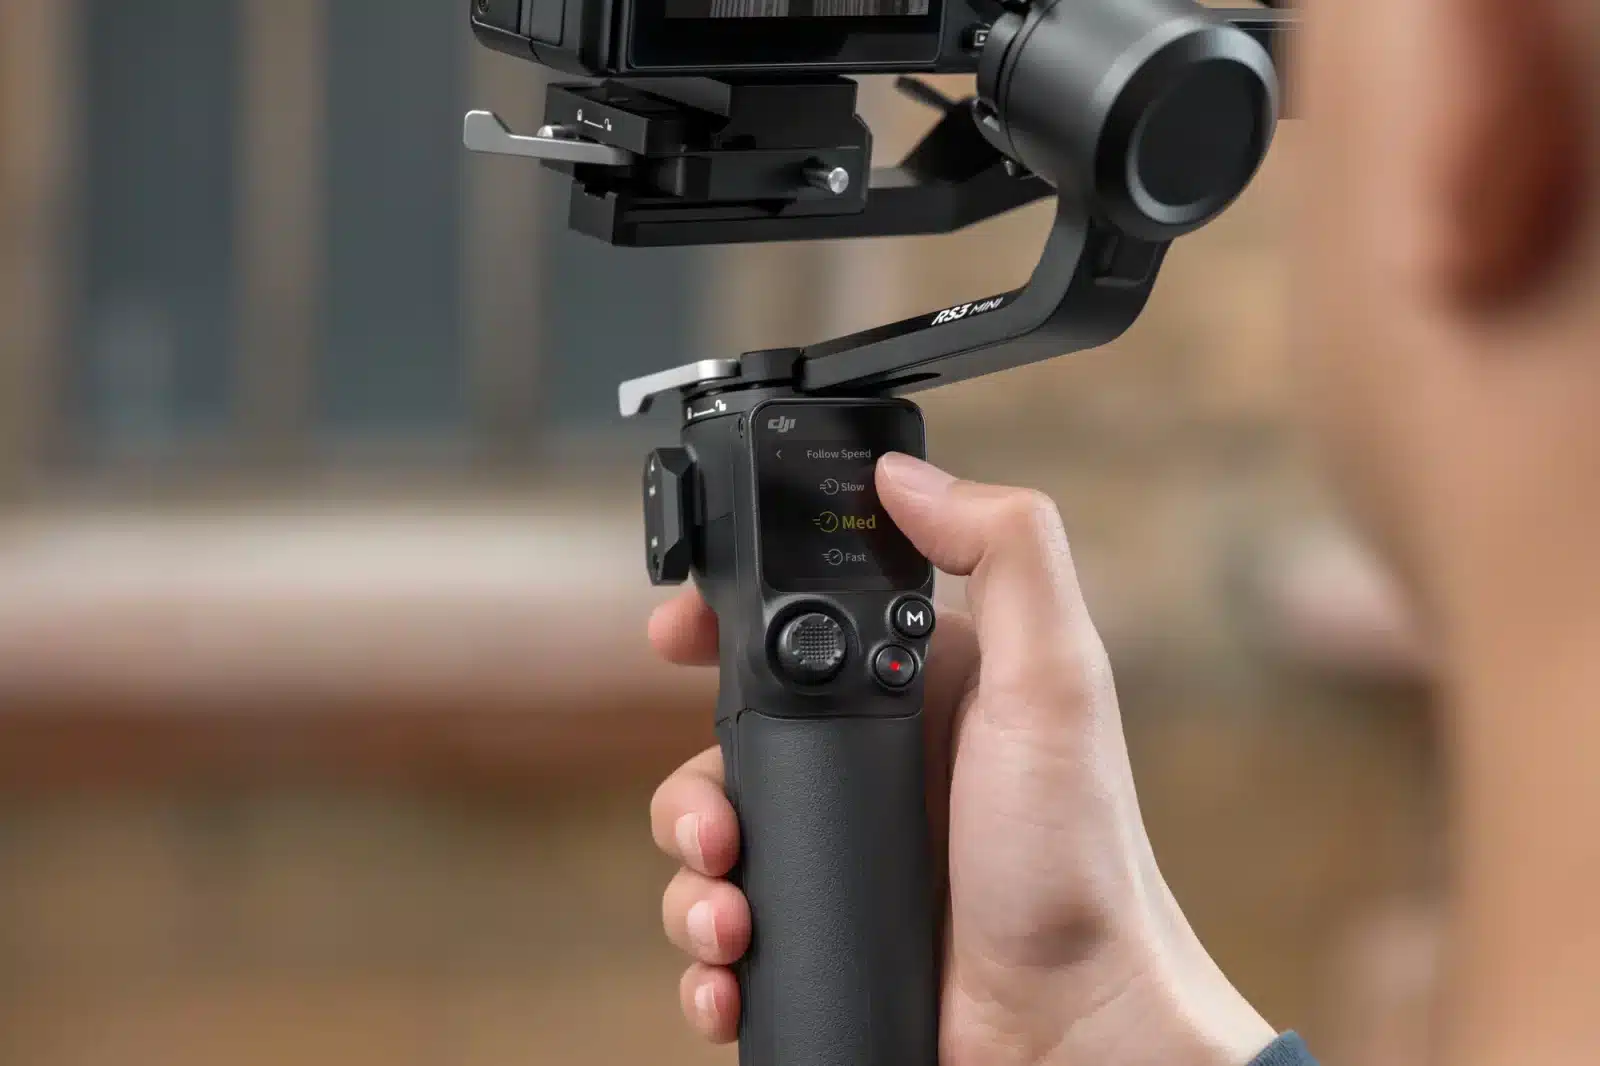 New DJI RS 3 Mini is the perfect travel gimbal for your mirrorless camera 0103.jpg